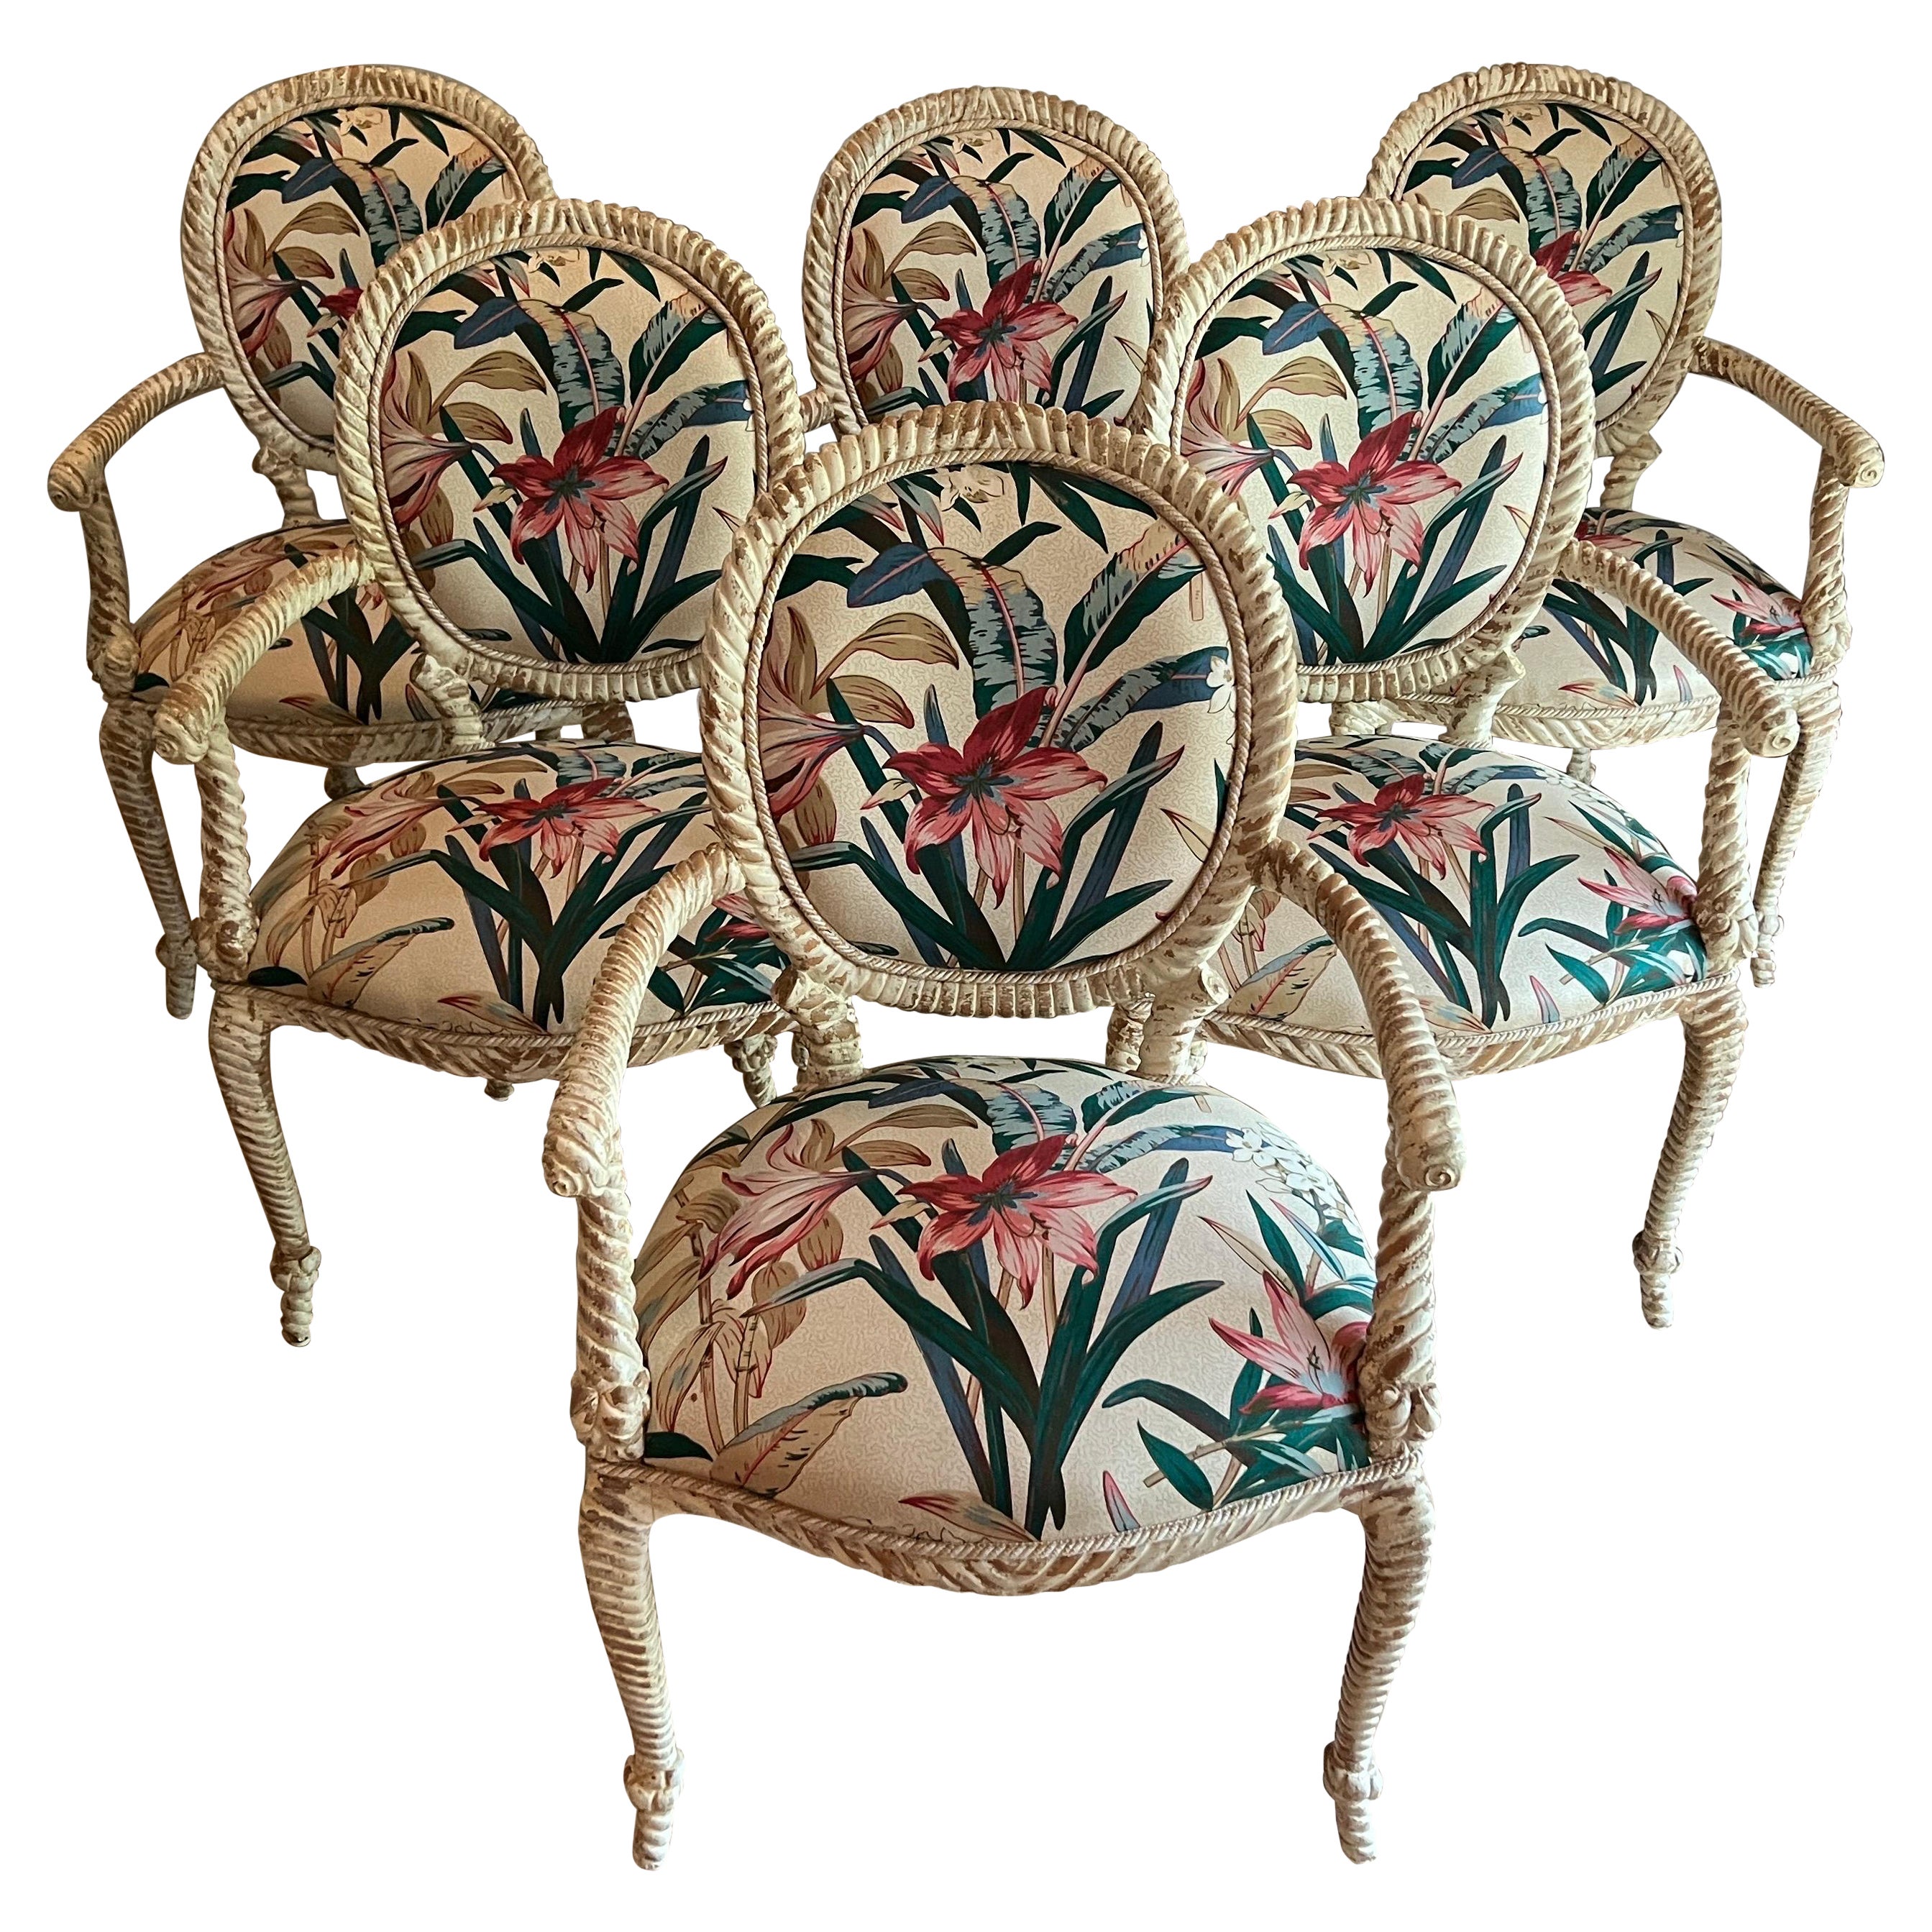 Vintage Faux Bois Distressed White Painted Carved Wood Armchairs Sold in Pairs For Sale